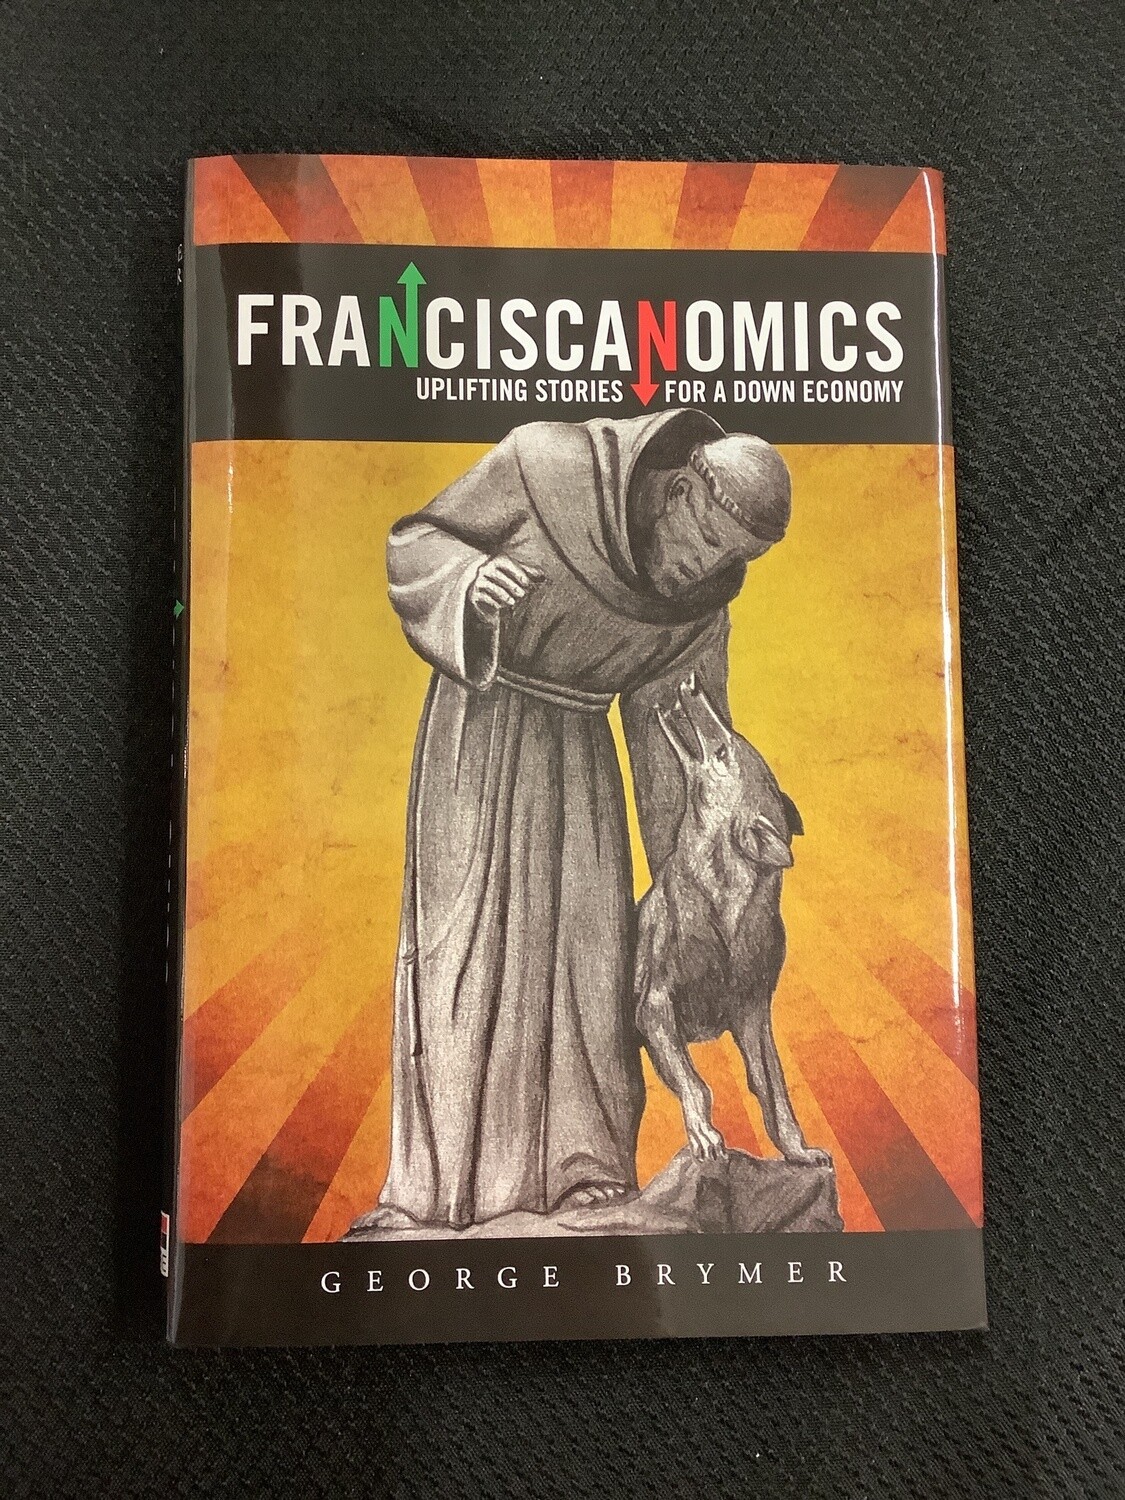 Franciscanomics Uplifting Stories for a Down Economy - George Brymer